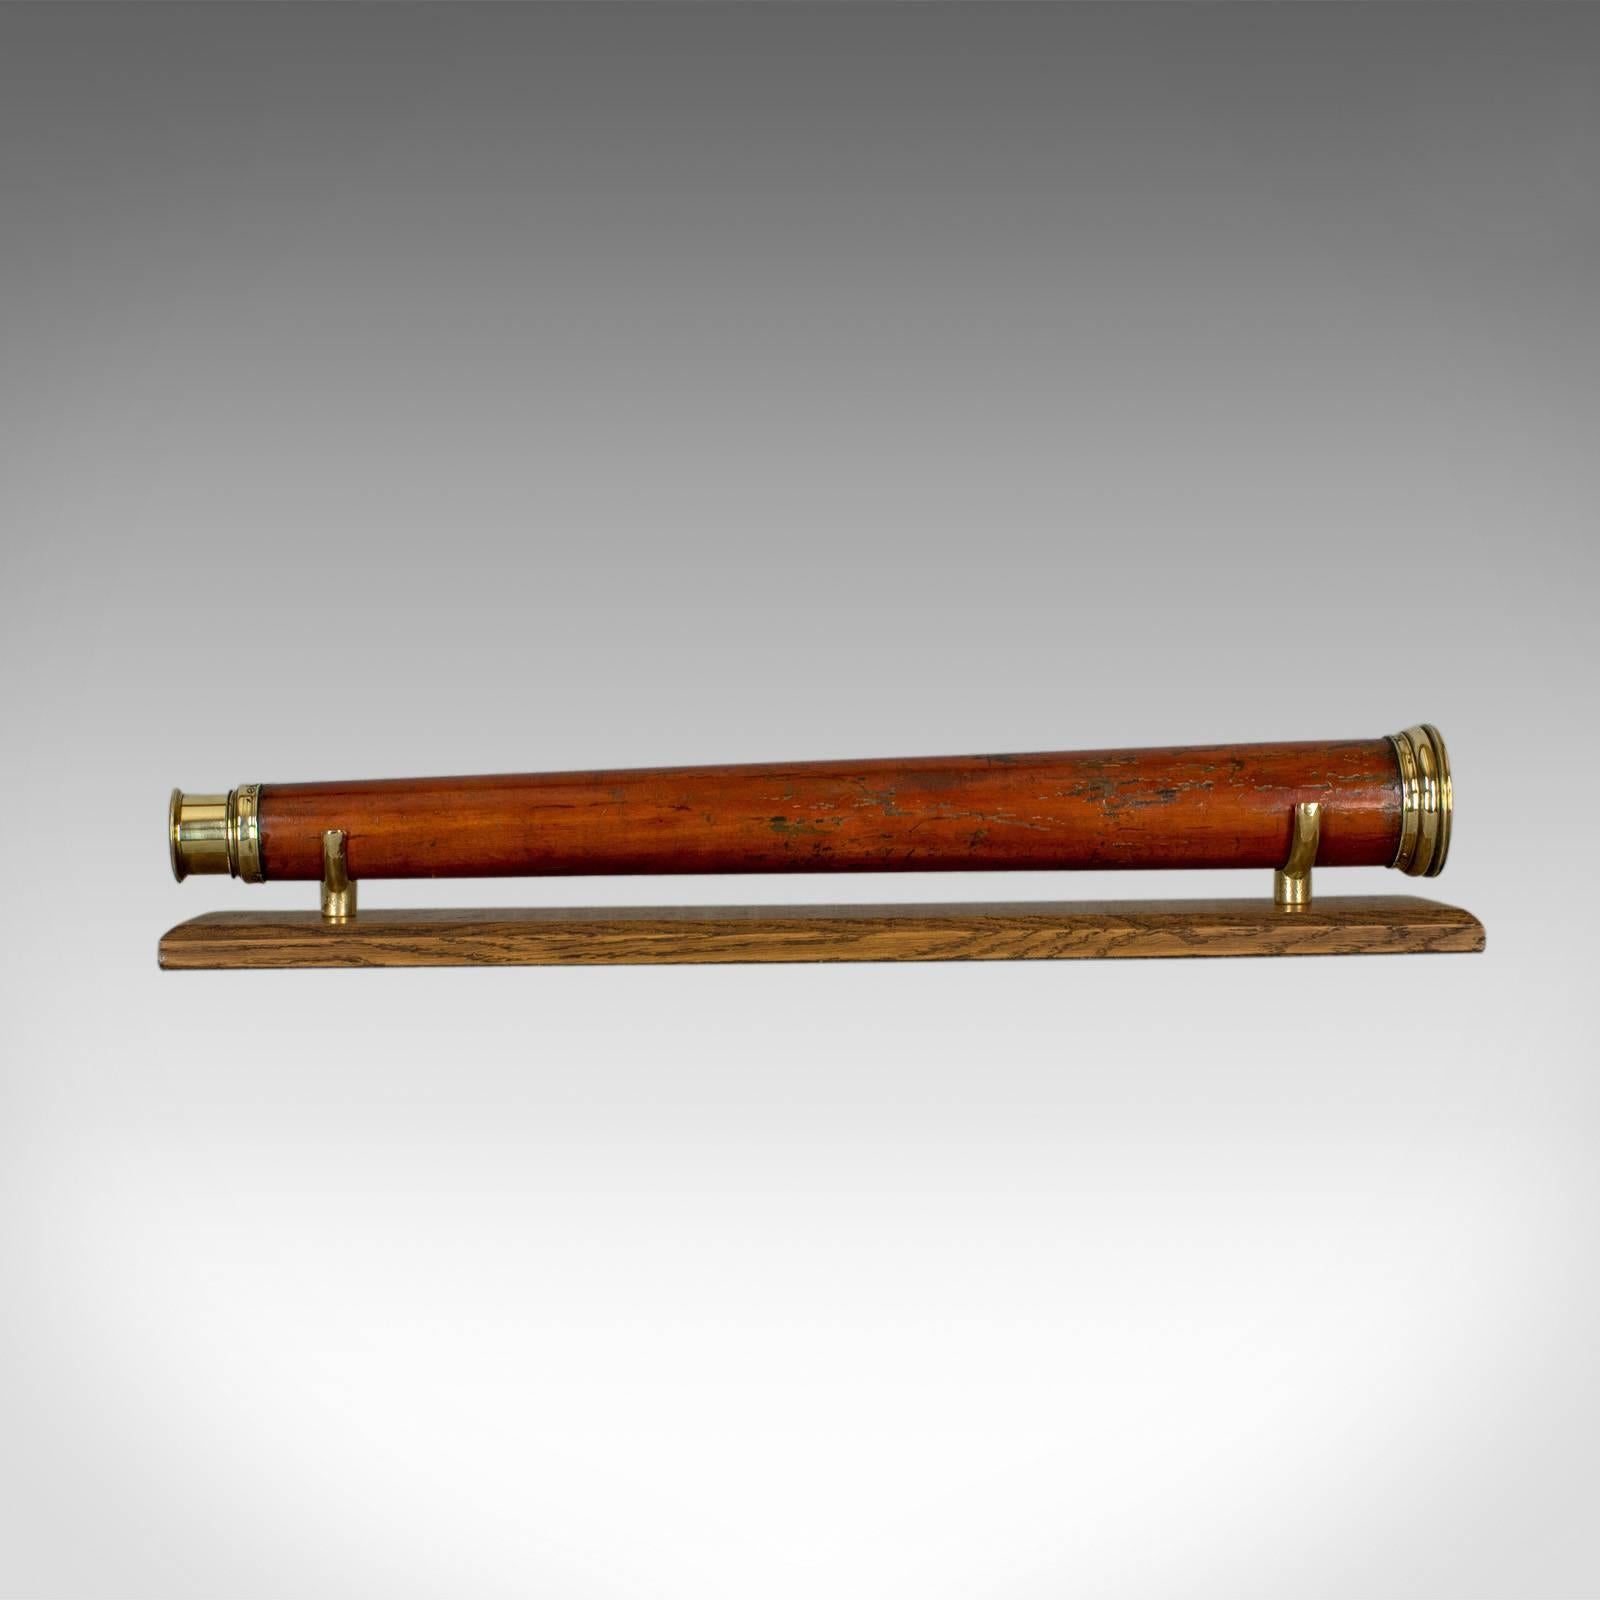 This is an antique telescope, an English single draw refractor for terrestrial or astronomical use by T Harris & Son, London and dating to circa 1810.

Perfect for bird watching, landscape appreciation, wildlife, or maritime observation. Equally